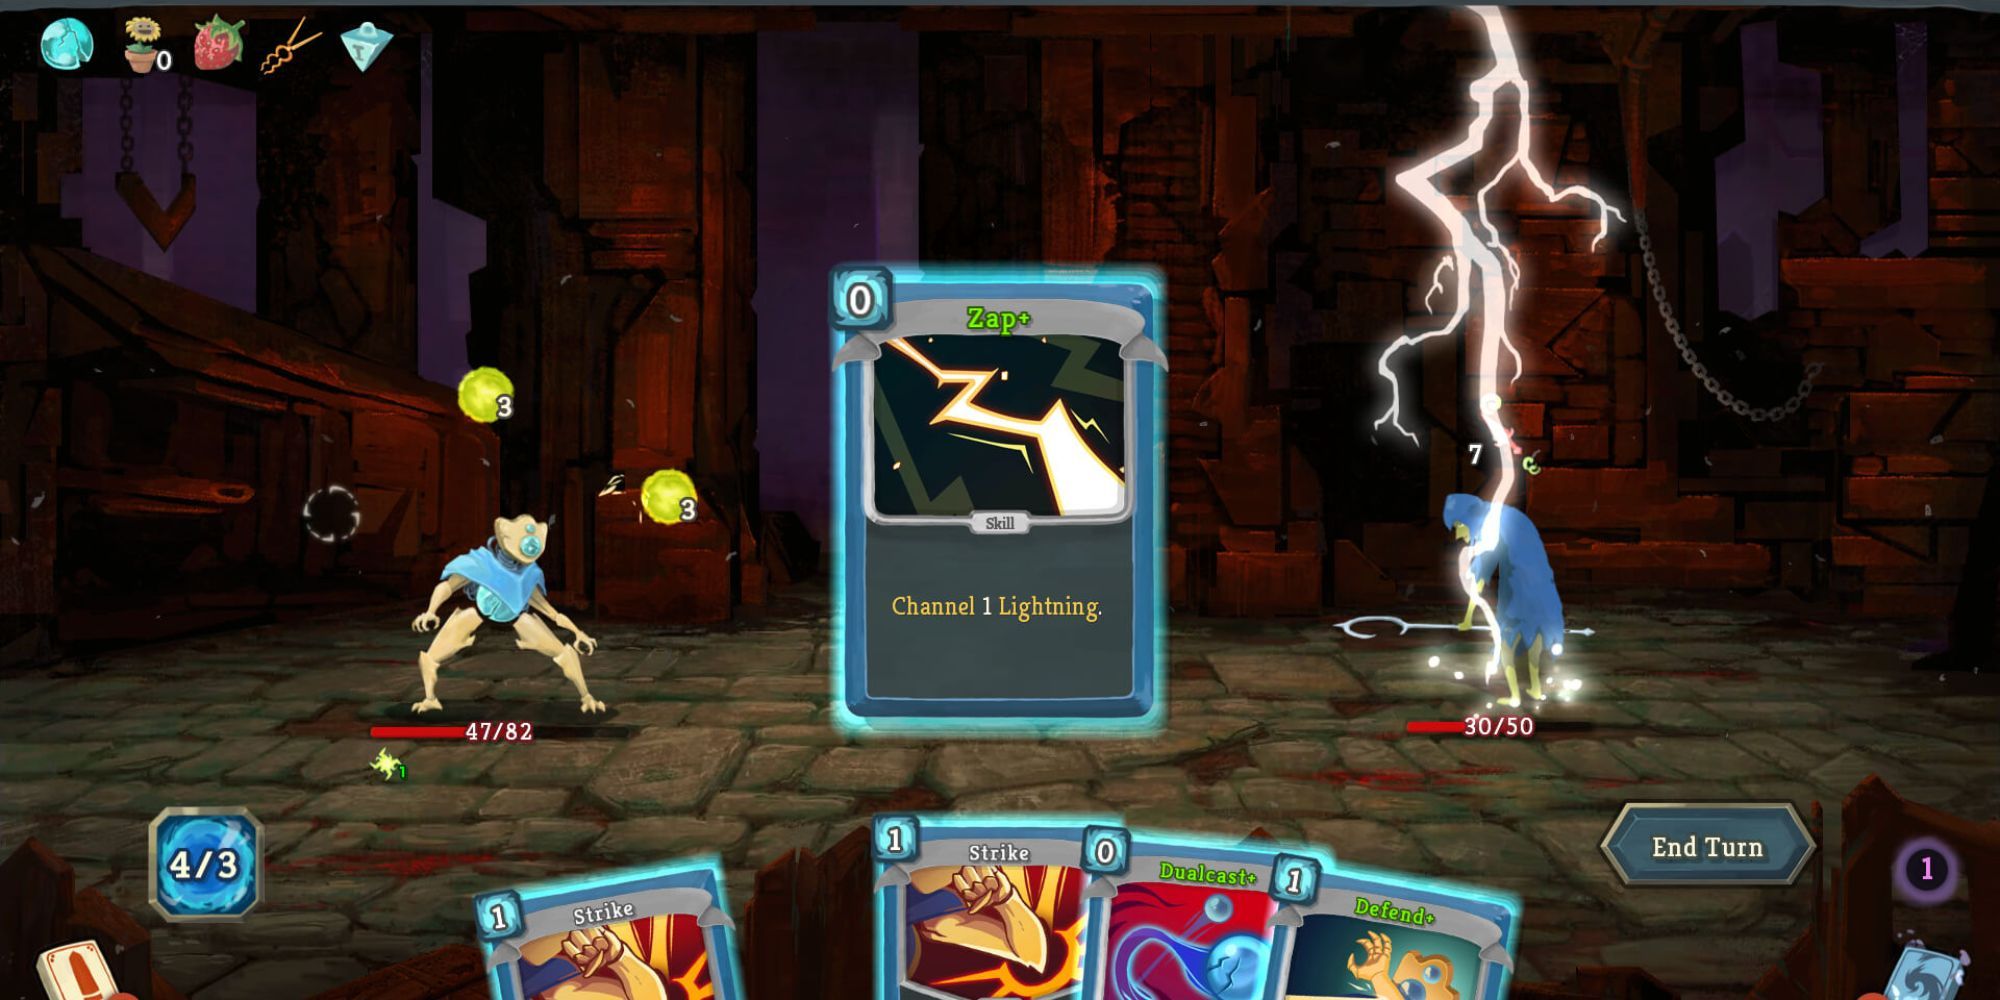 The Defect uses an electric attack on a Blue Slaver